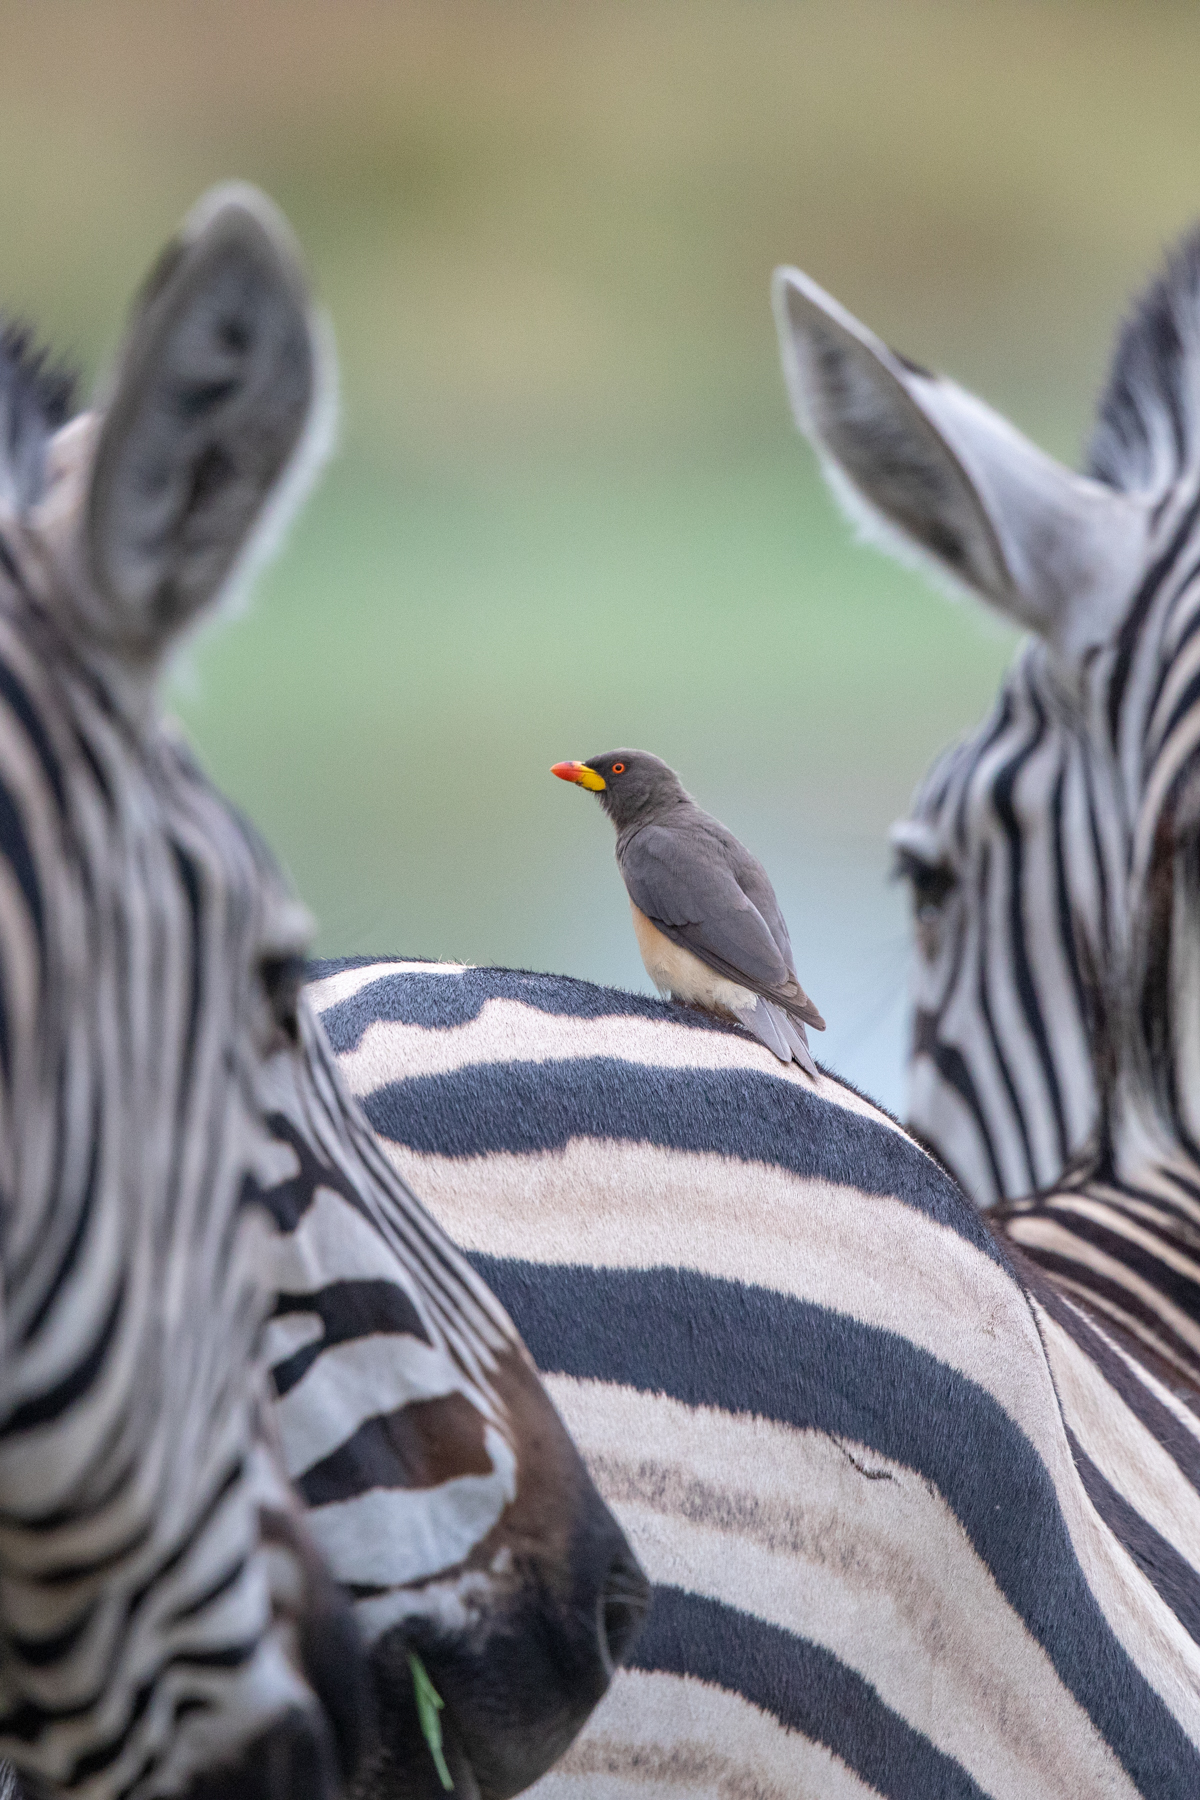 A Yellow-billed Oxpecker perches on the rump of a Common Zebra in Botswana